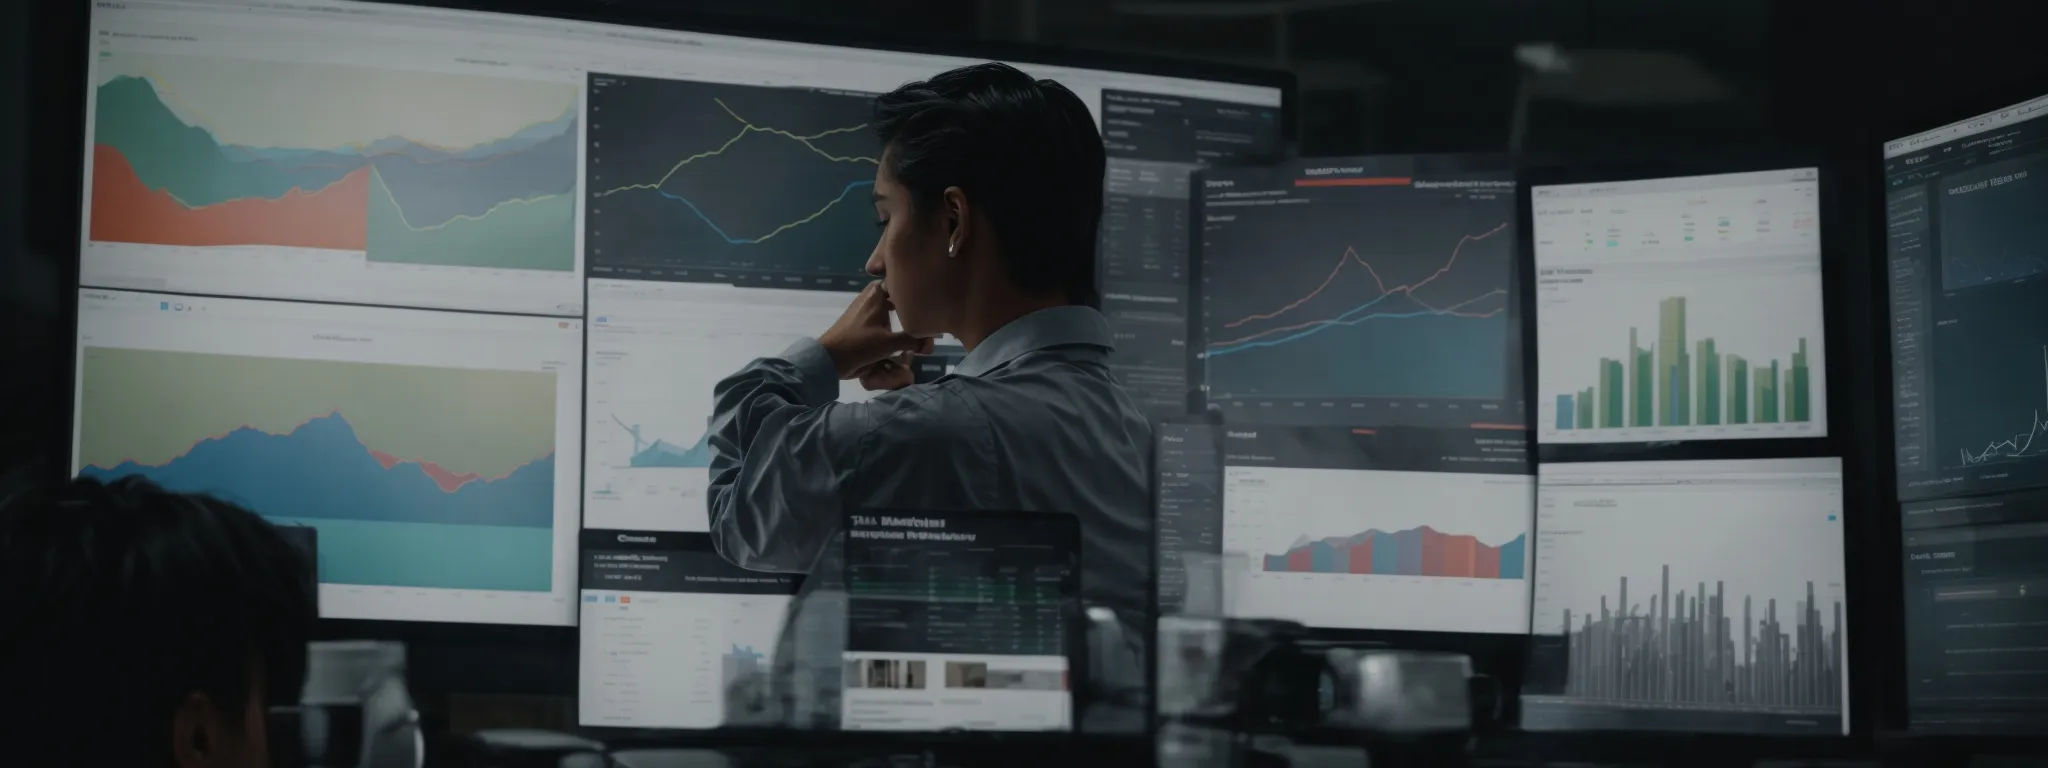 a marketer scrutinizes a computer dashboard displaying analytics and seo metrics while examining various graphs and charts.